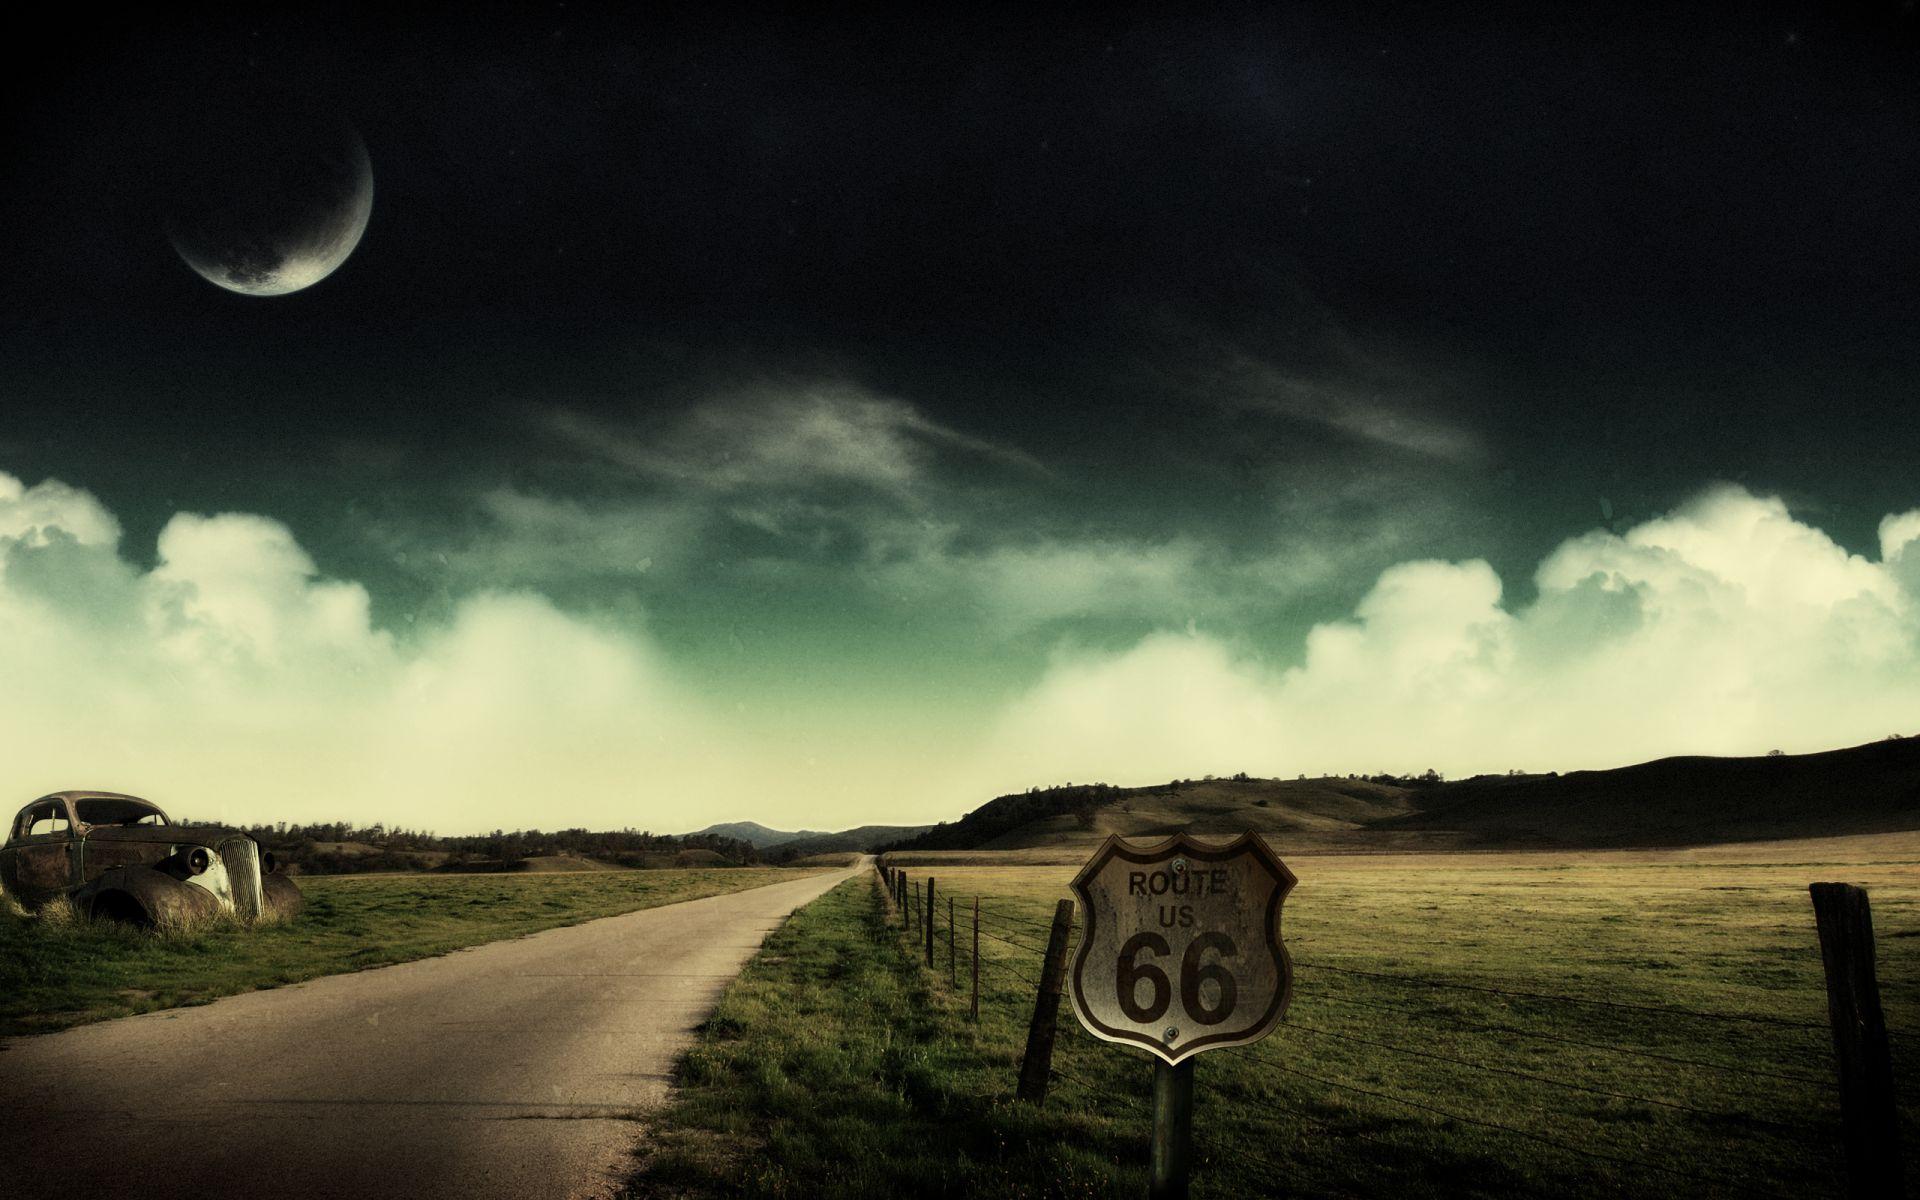 Route 66 HD background Wallpaper. High Quality Wallpaper